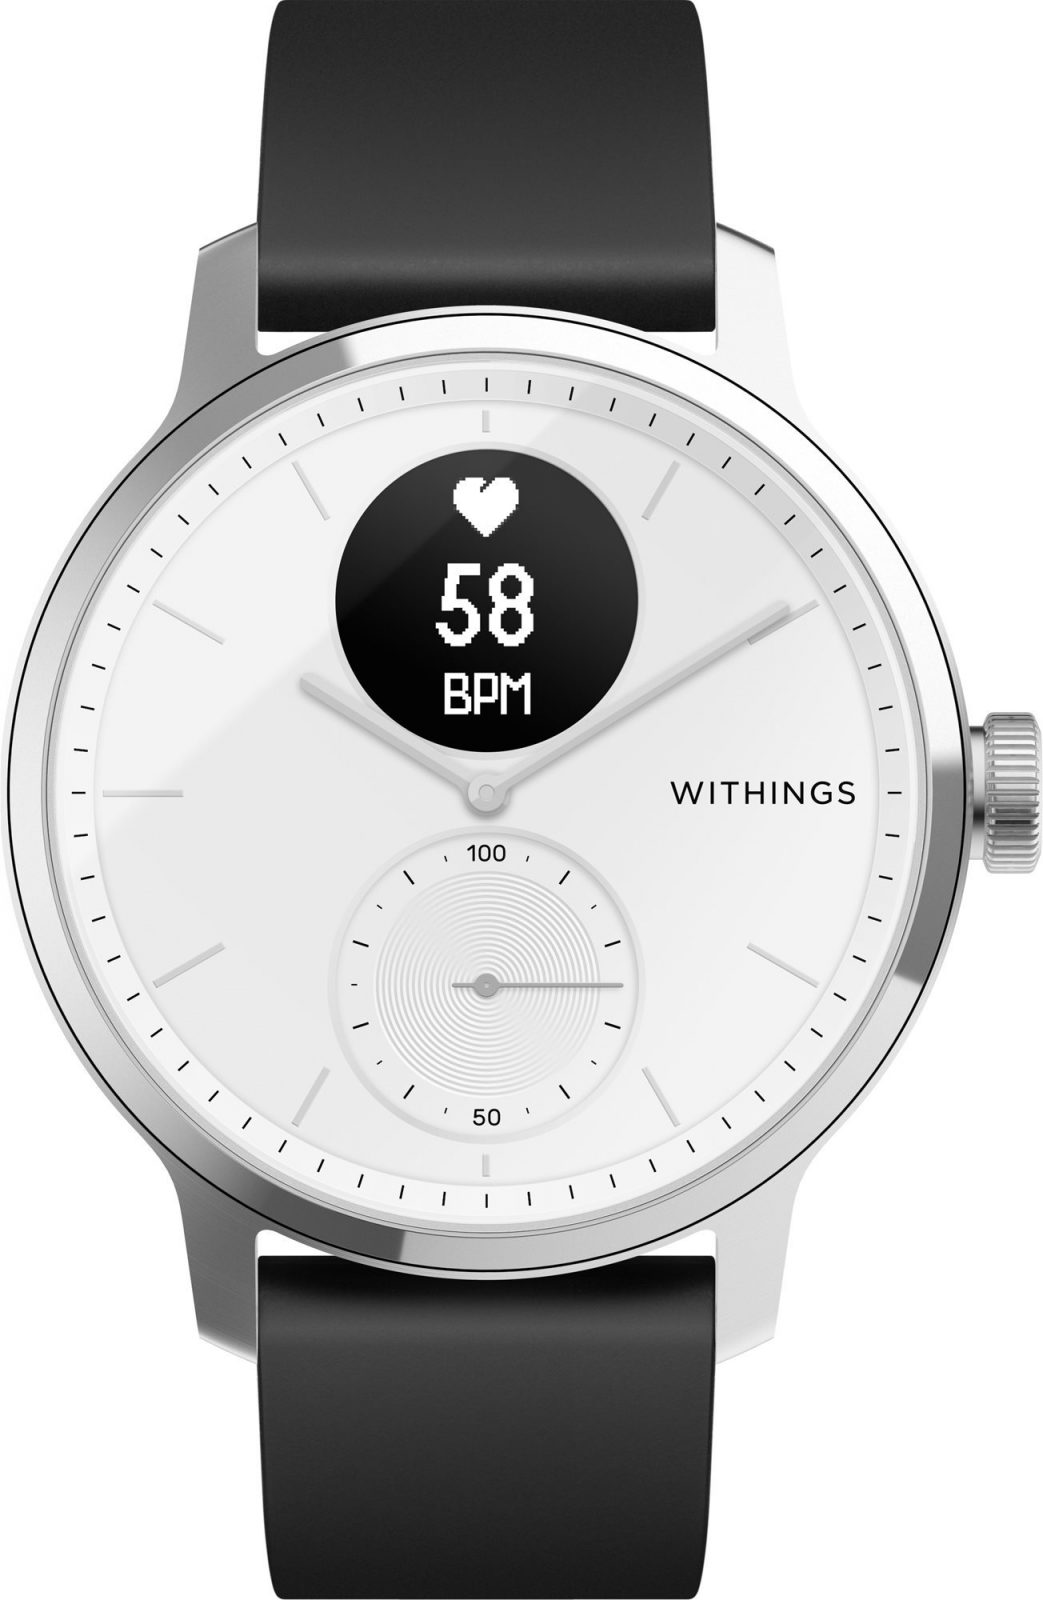 Okosóra Withings Scanwatch 42mm - White